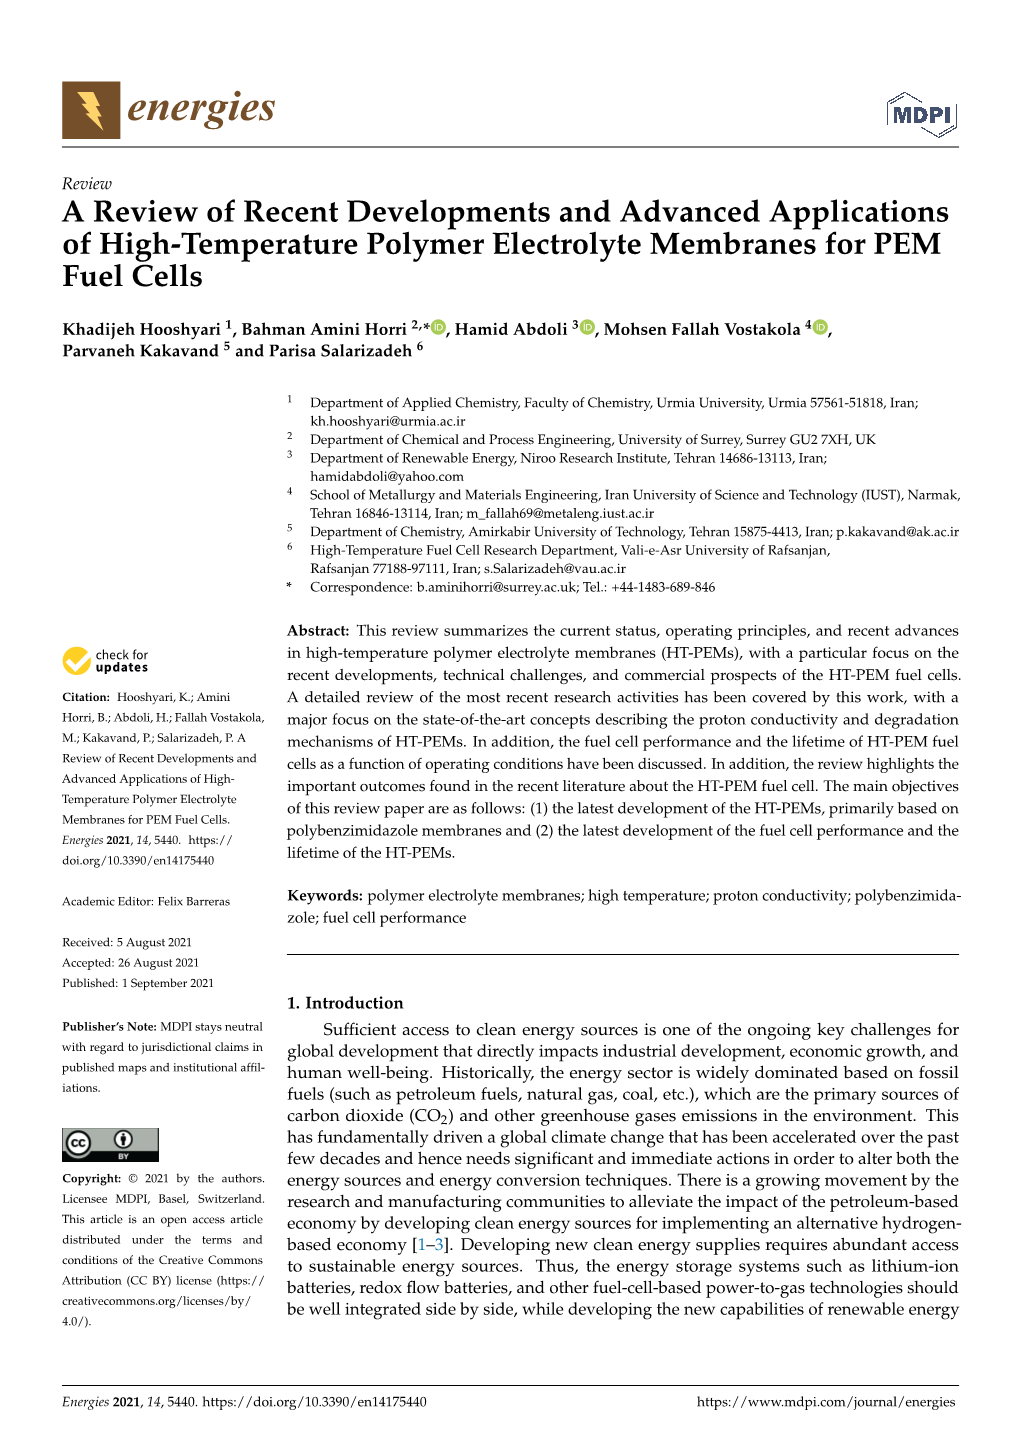 A Review of Recent Developments and Advanced Applications of High-Temperature Polymer Electrolyte Membranes for PEM Fuel Cells